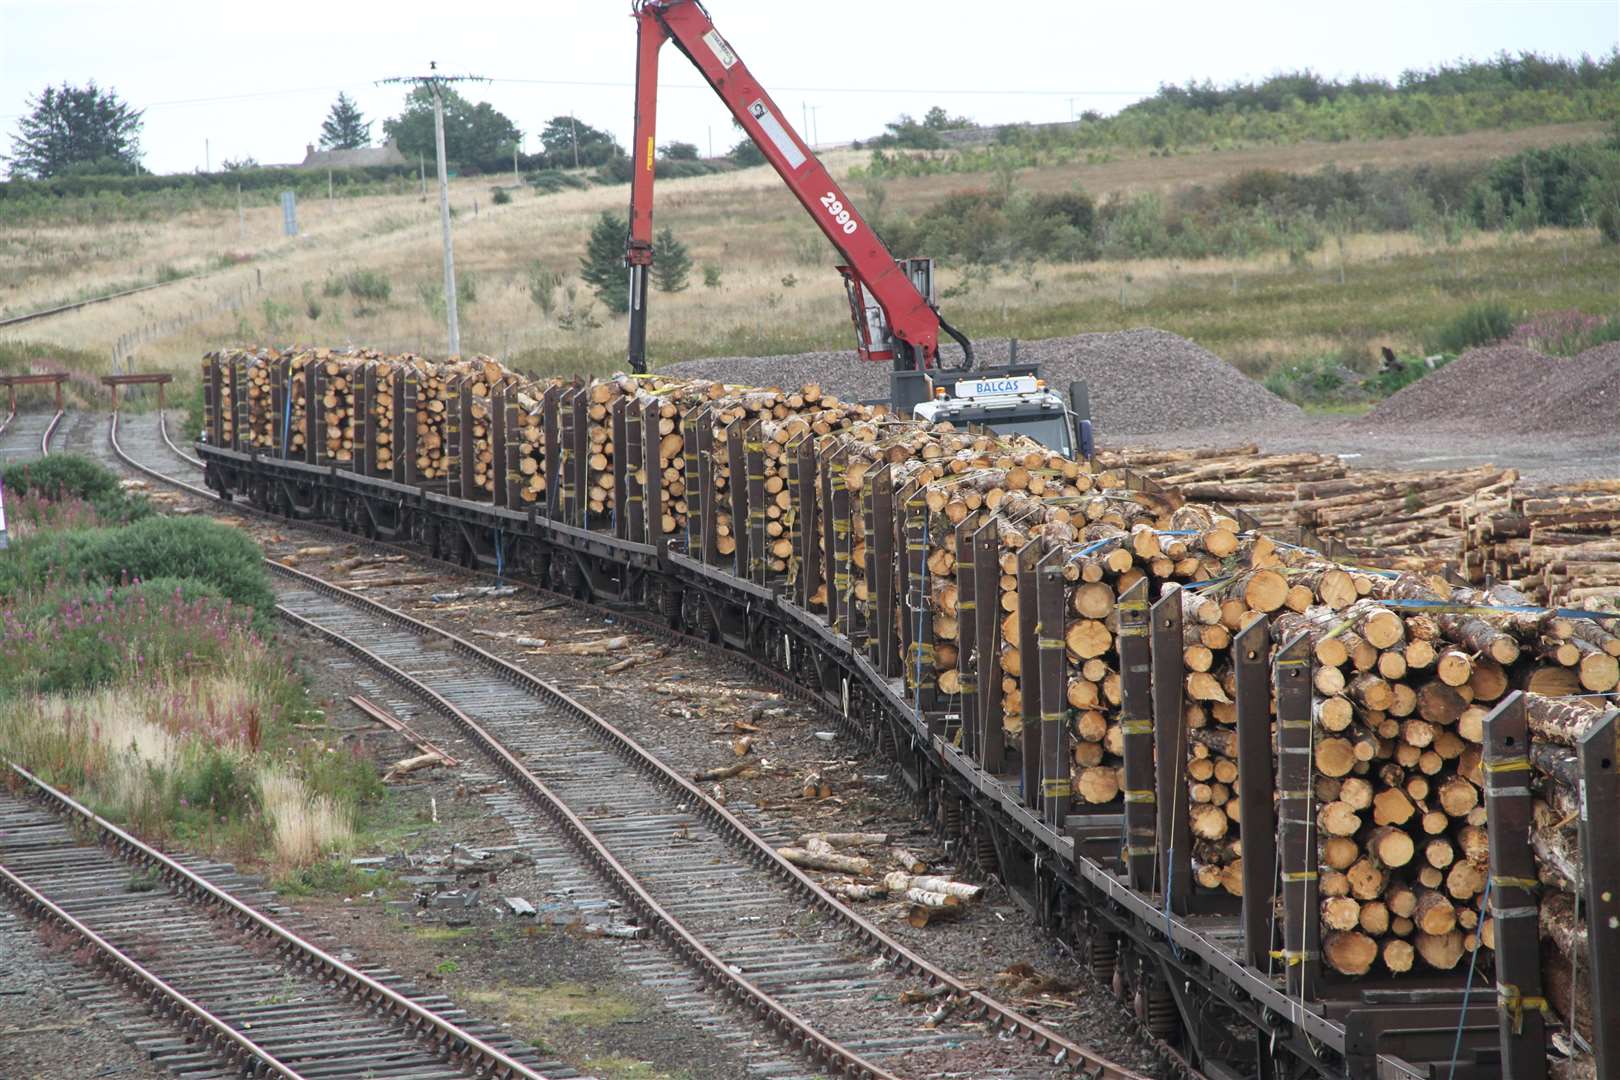 Timber being loaded onto carriages at Georgemas. A new scheme could see the same happening at Altnabreac.